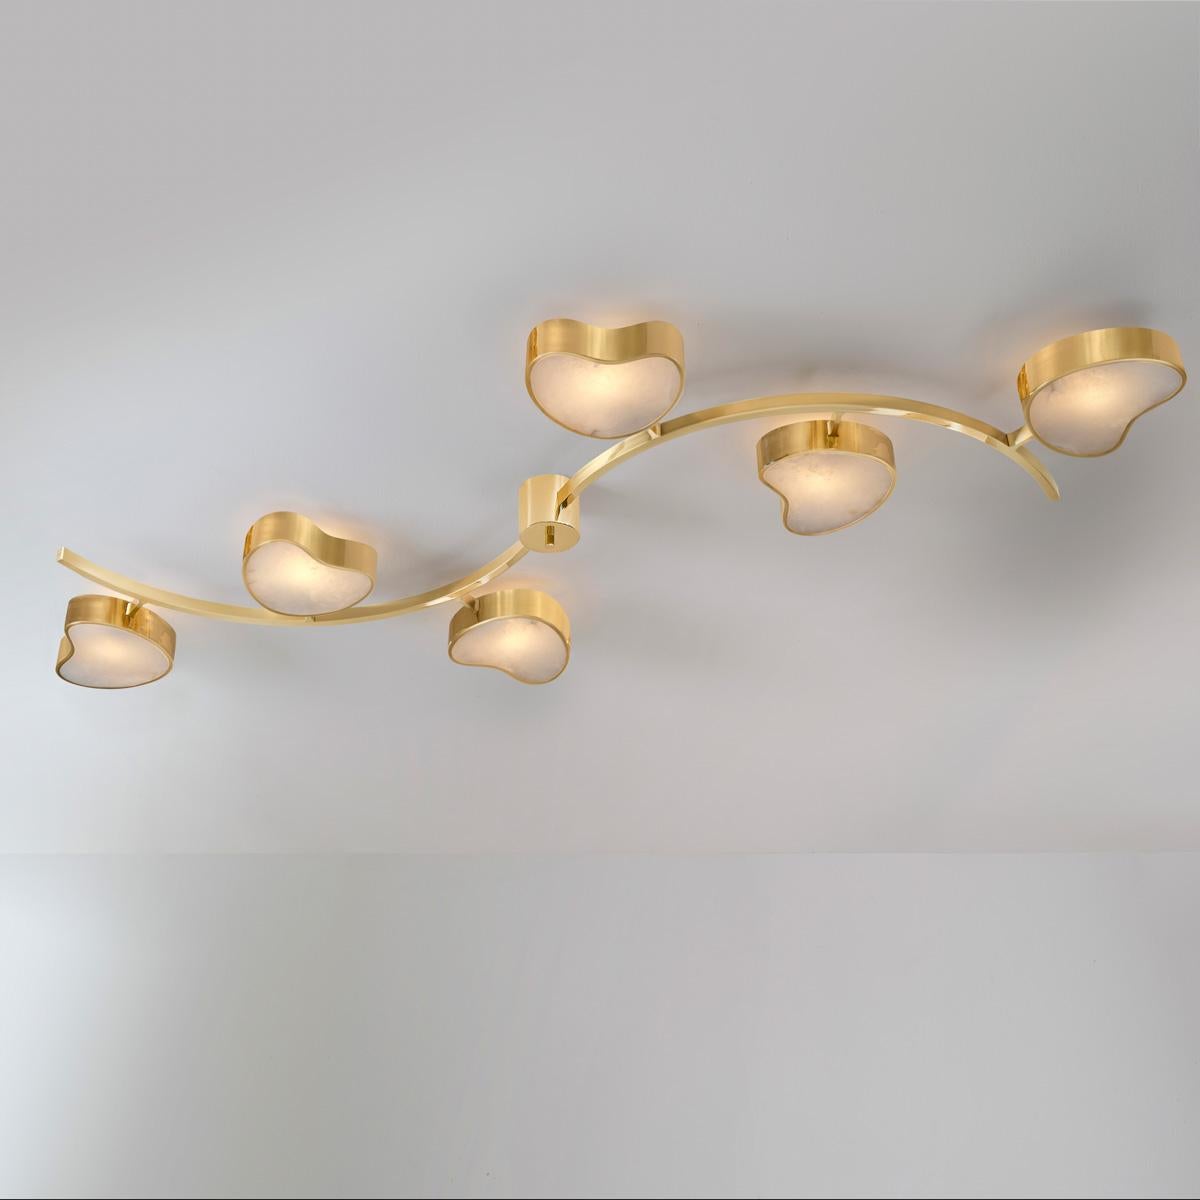 Cuore N.6 Ceiling Light by Gaspare Asaro. Bronze and Satin Brass Finish For Sale 6